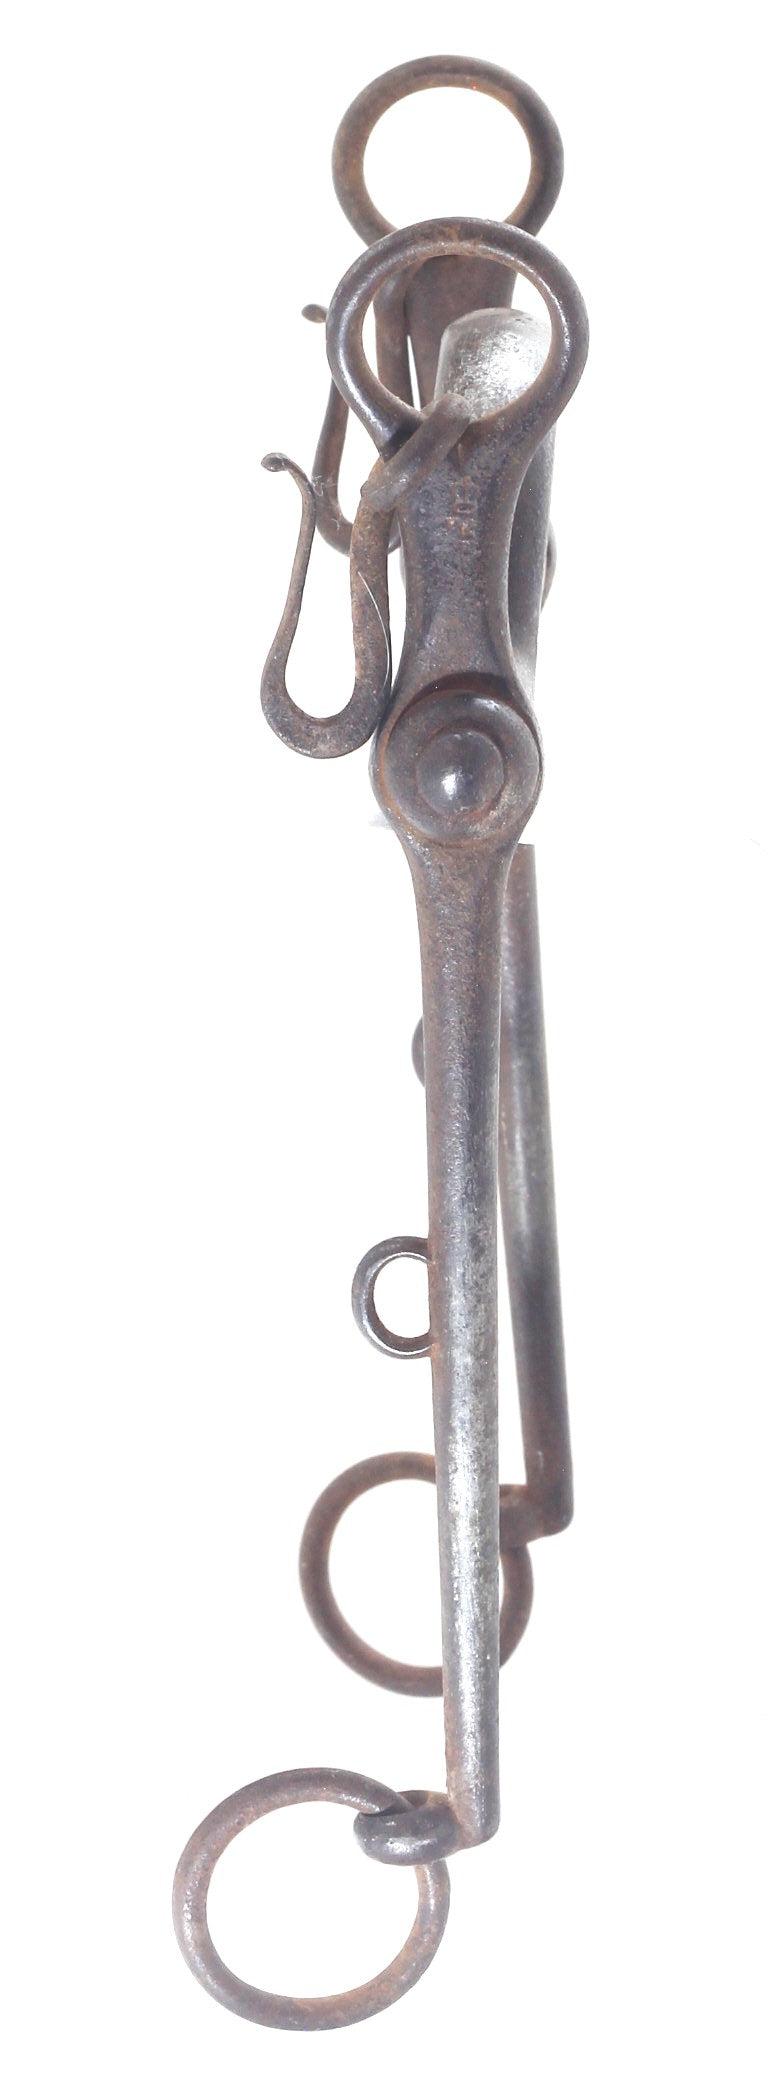 An Antique Curb Bit with Segundo Mouthpiece by Long